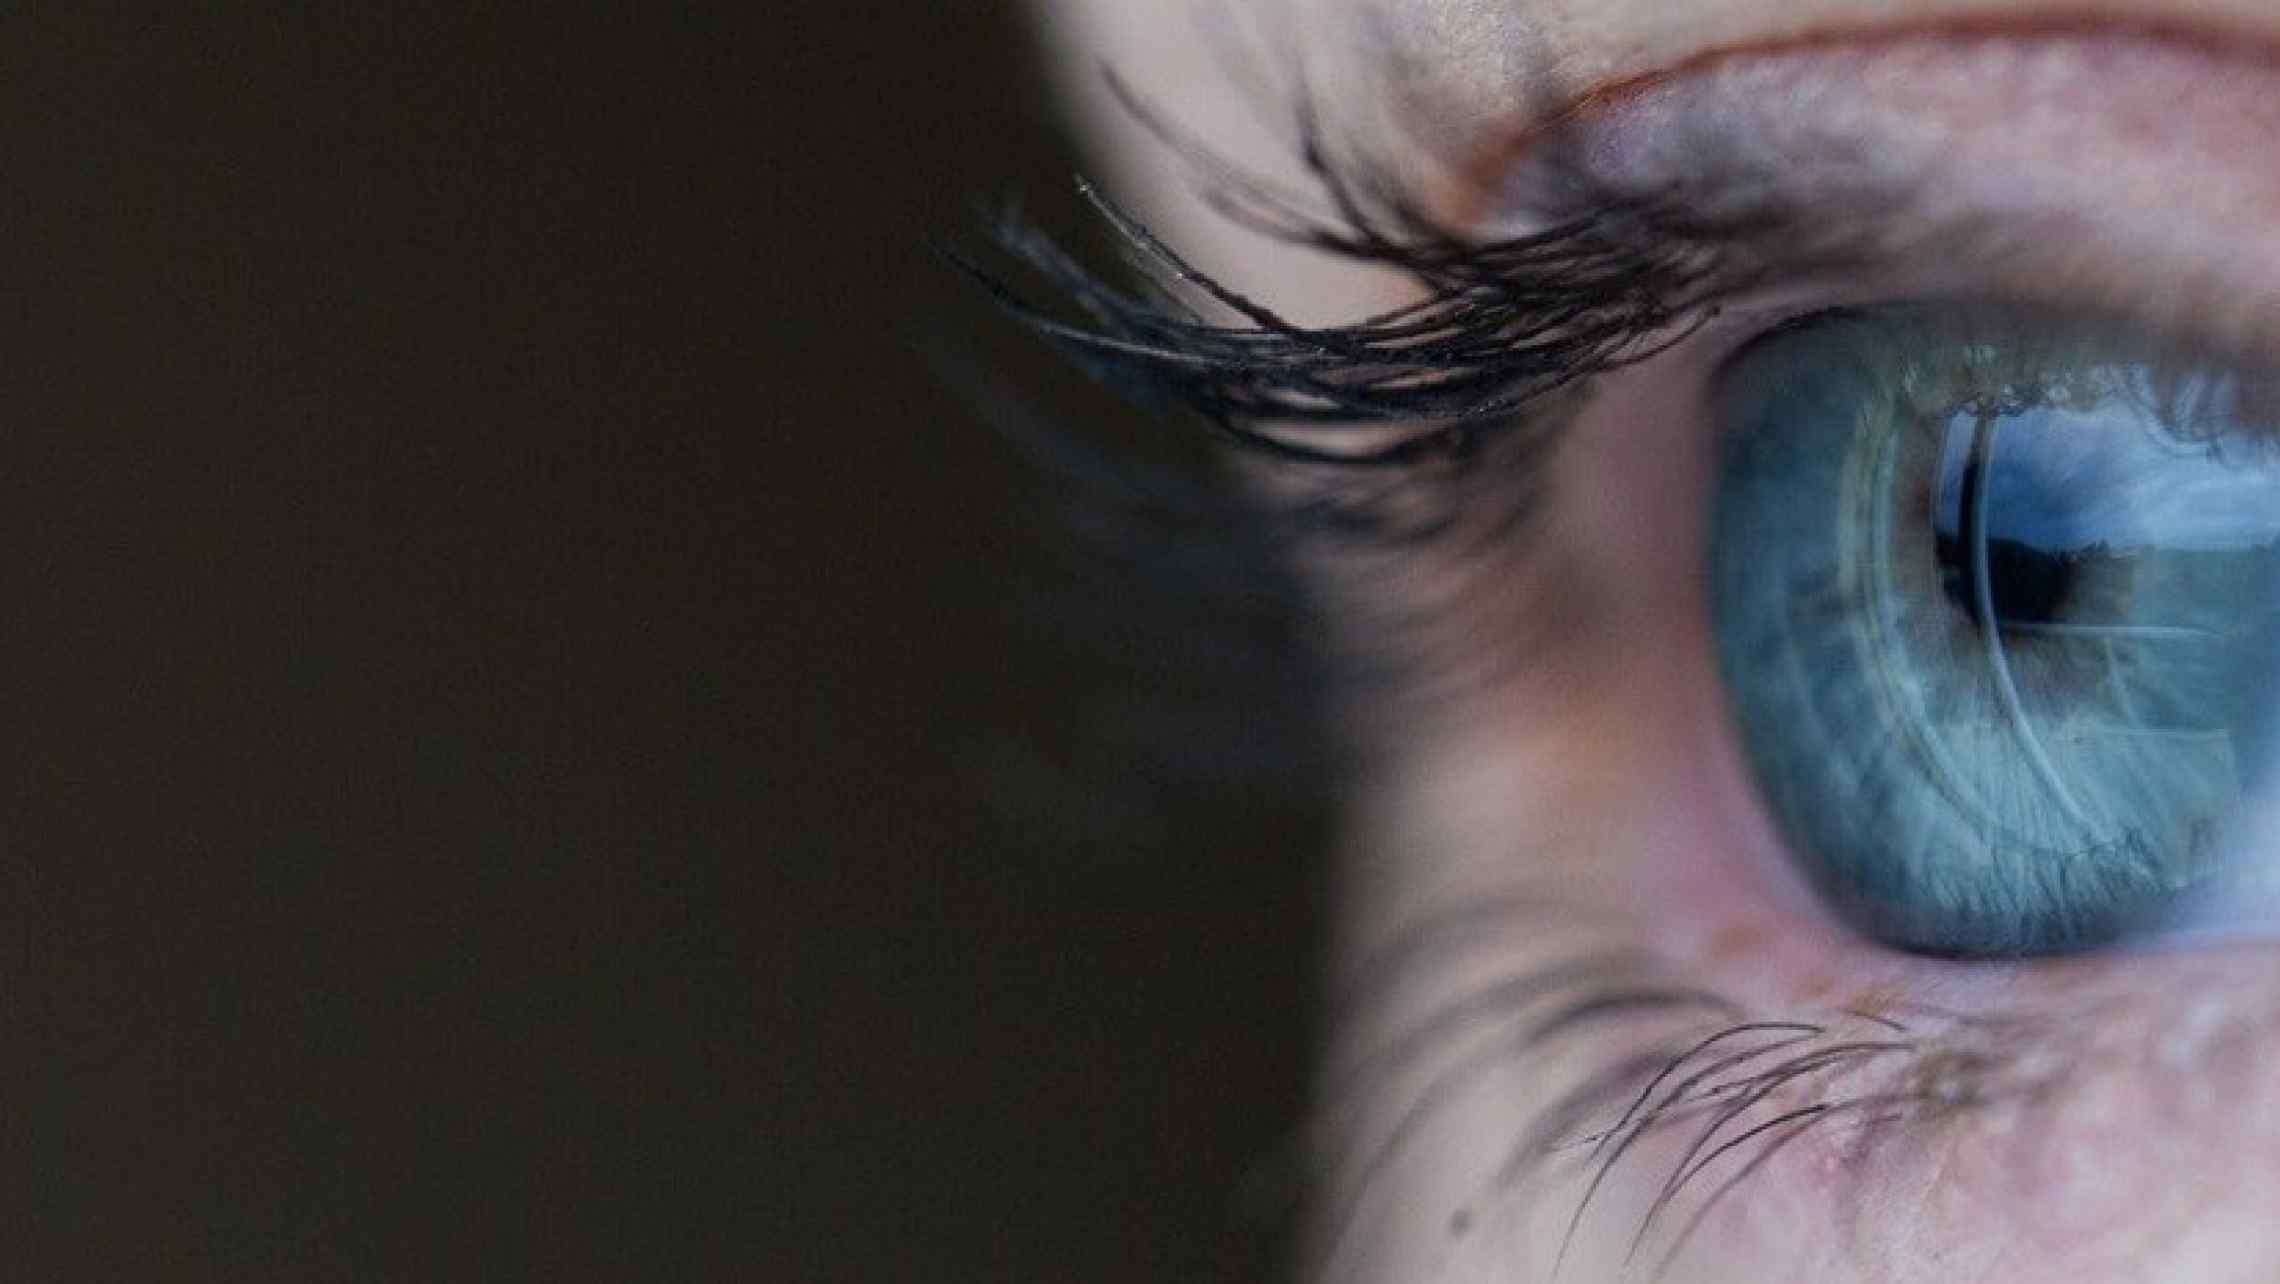 GENE THERAPY IS SUCCESSFULLY TREATING A COMMON FORM OF INHERITED BLINDNESS